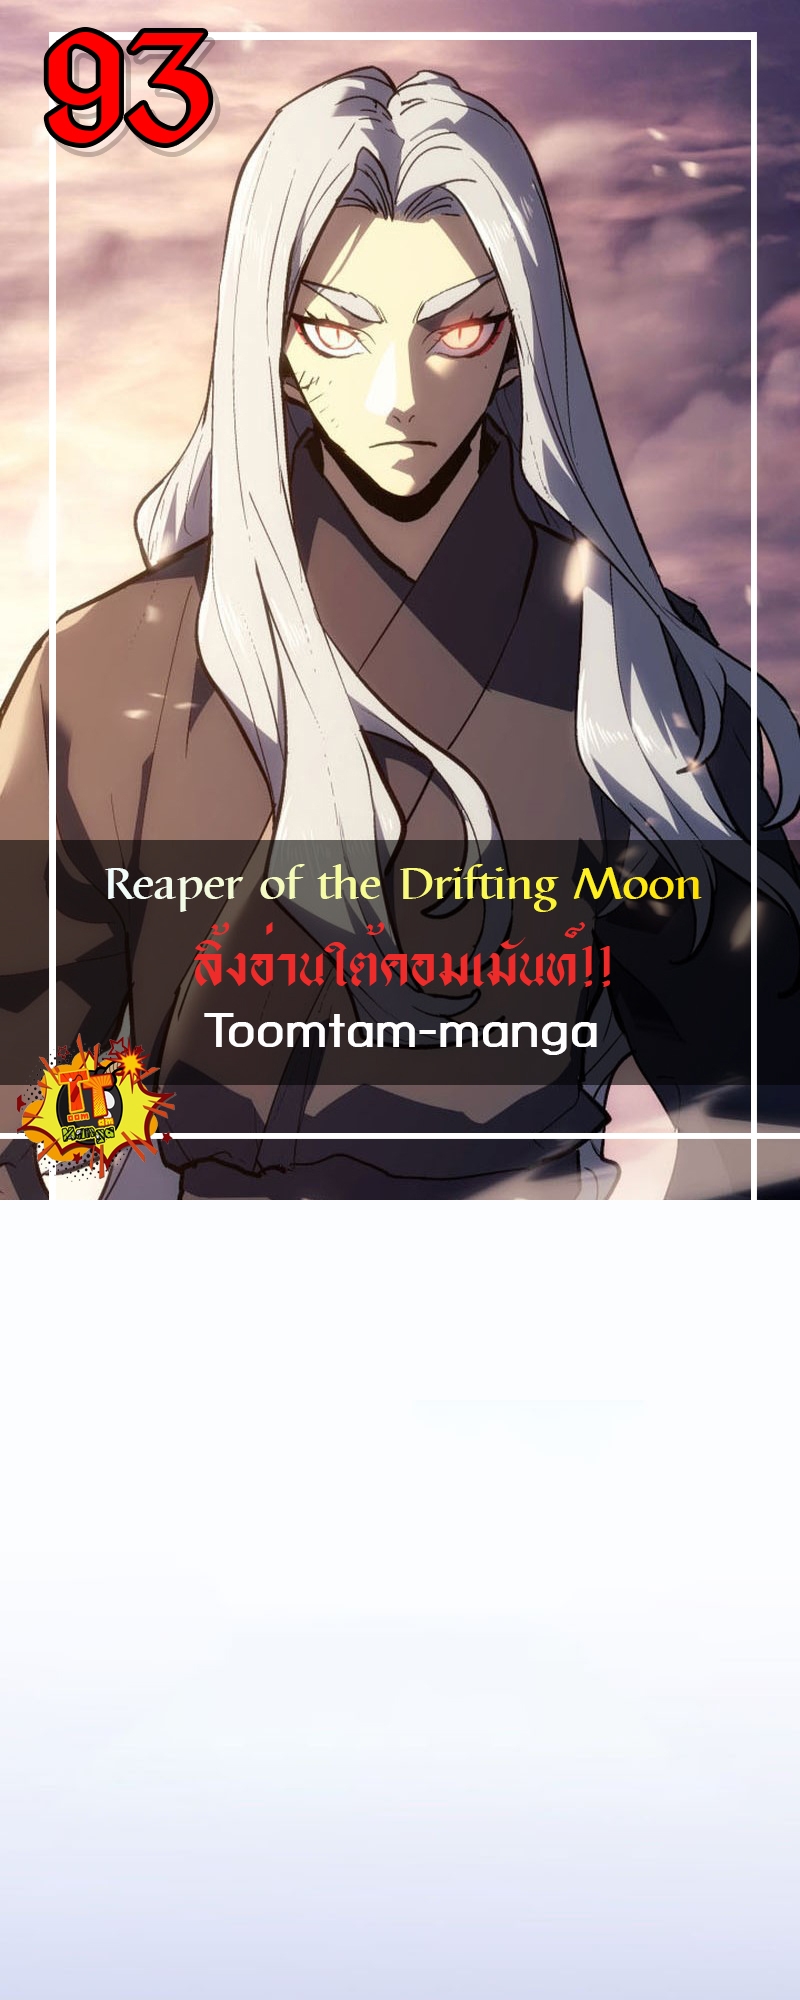 Reaper of the Drifting Moon 93 27 06 25670001